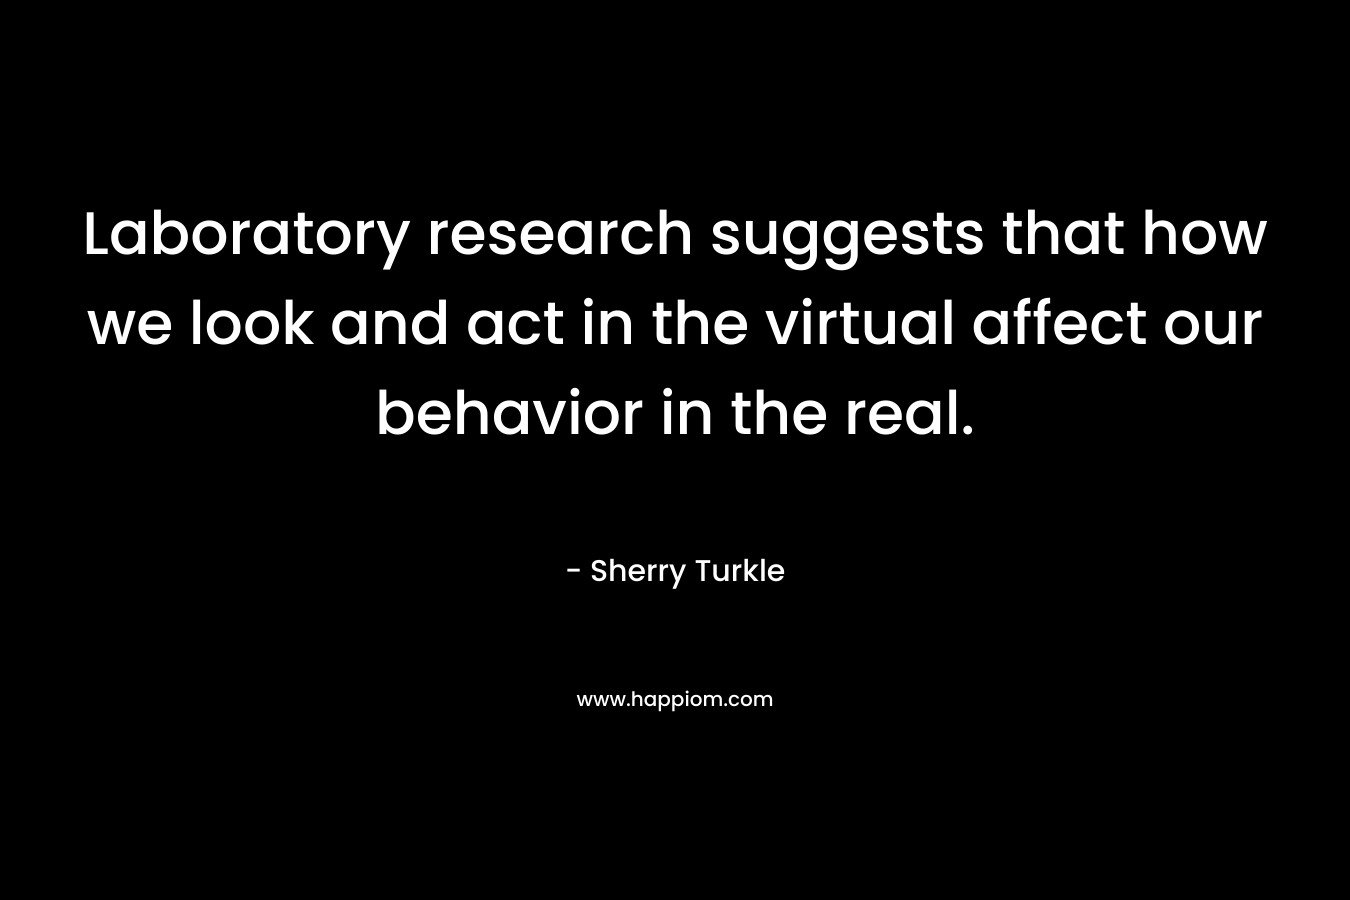 Laboratory research suggests that how we look and act in the virtual affect our behavior in the real. – Sherry Turkle